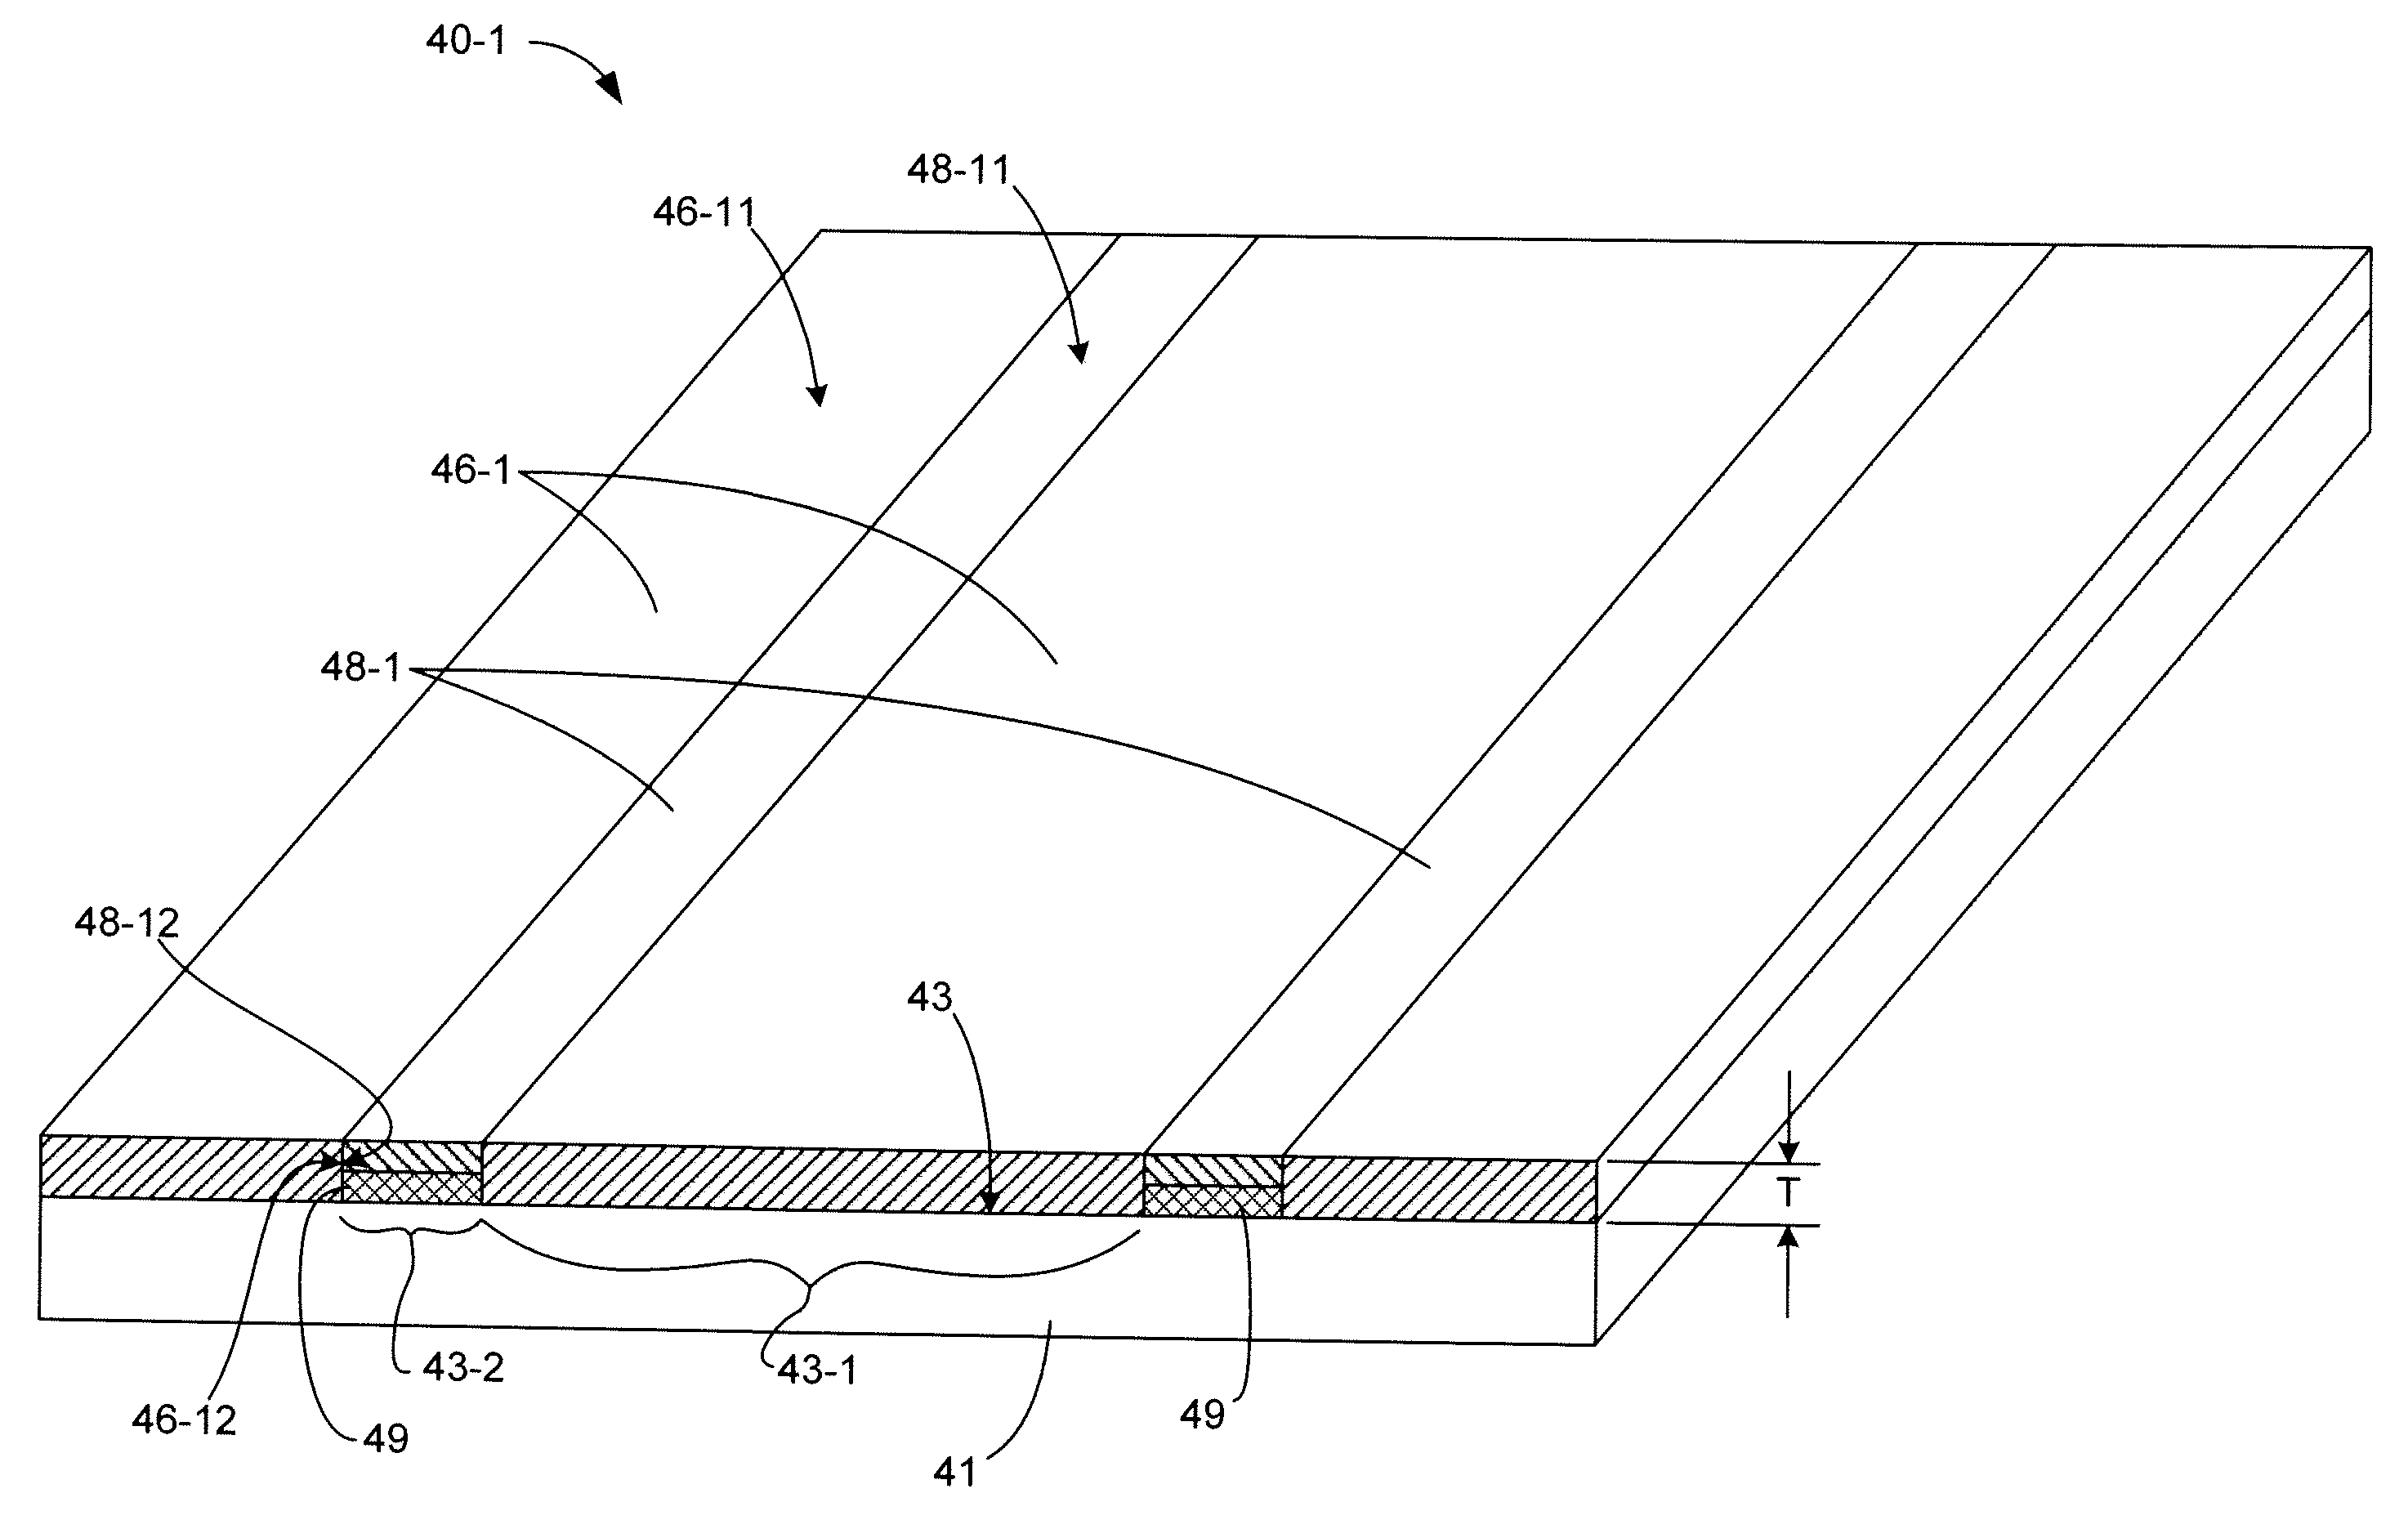 Solar Cell With Co-Planar Backside Metallization